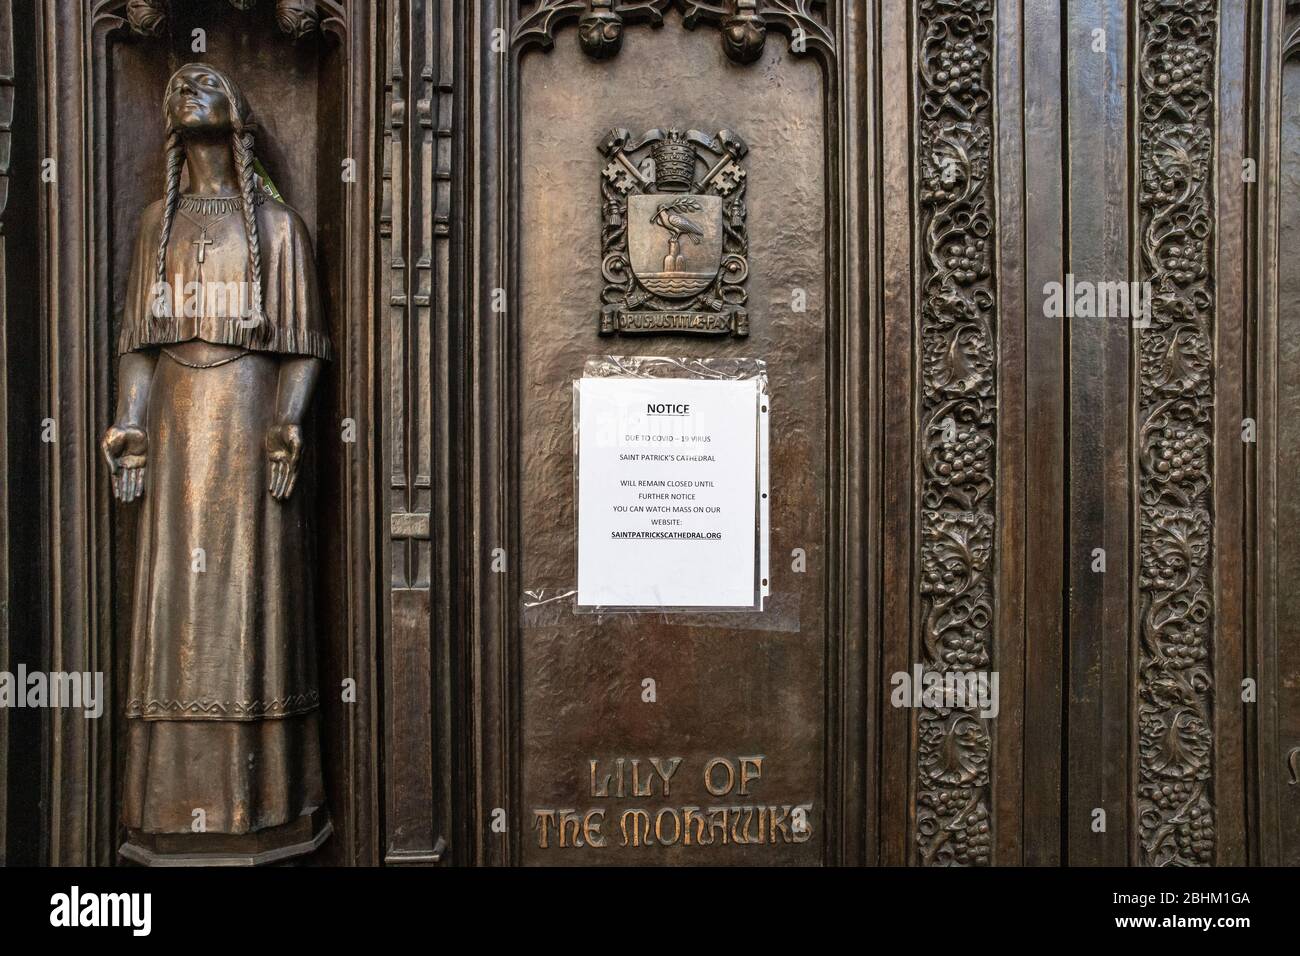 NEW YORK CITY - APRIL 19, 2020:  St. Patrick's Cathedral in midtown Manhattan stands empty with a sign on the doors during the Covid-19 Coronavirus pa Stock Photo